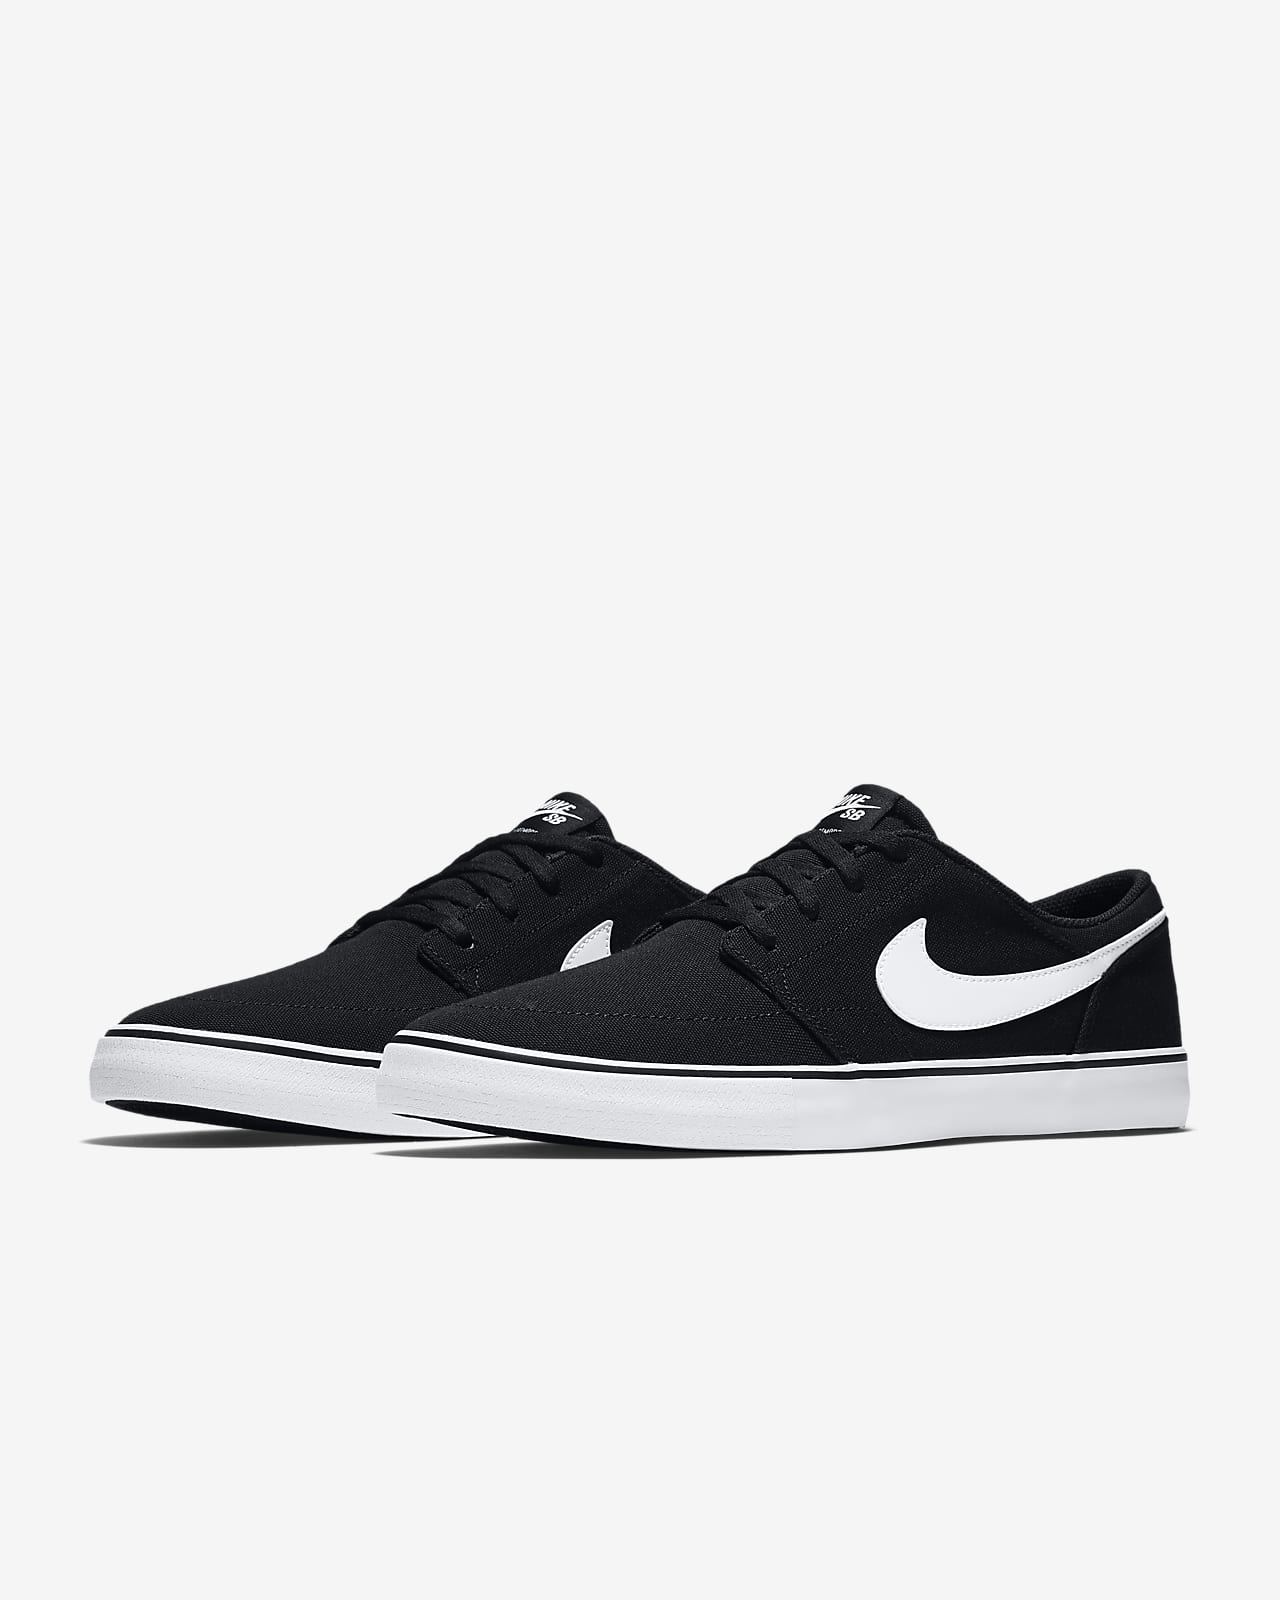 Nike Sb Portmore 2 Canvas Discount Sale, UP TO 62% OFF